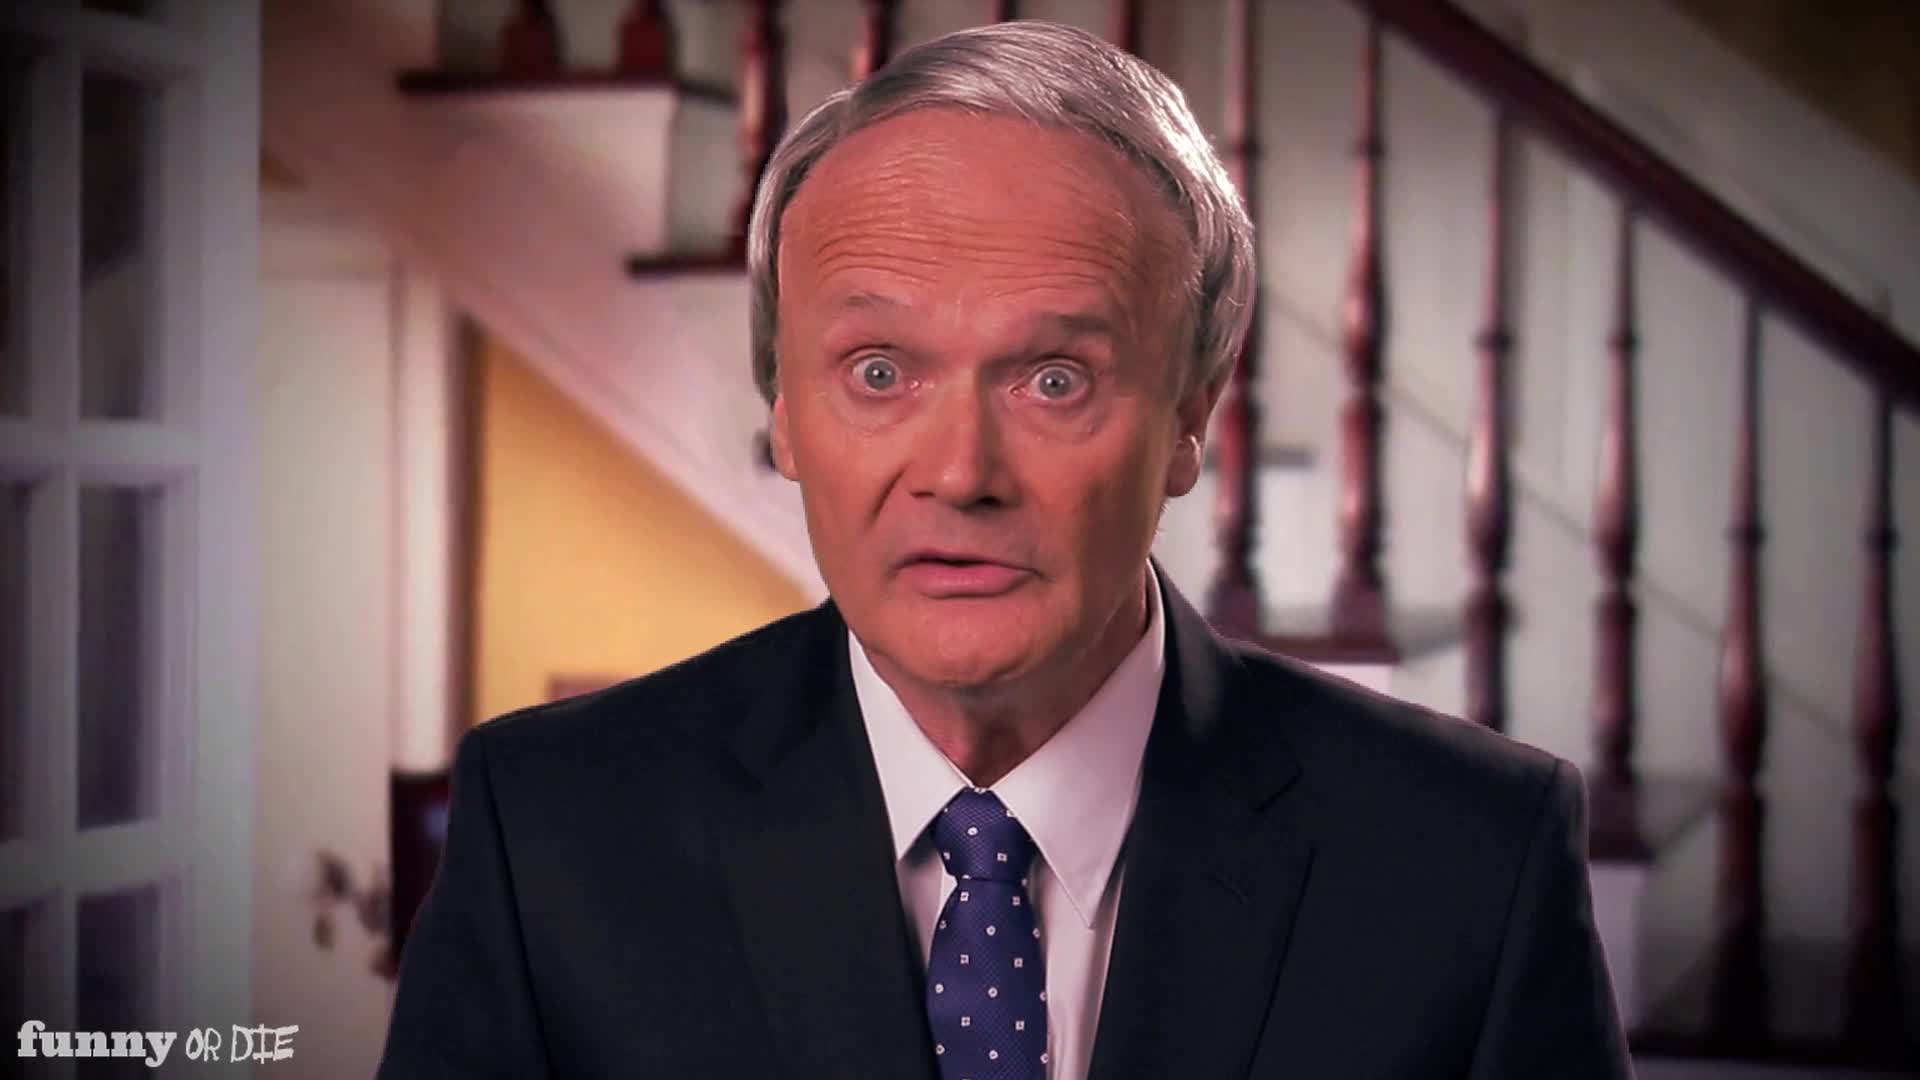 creed-bratton-wallpapers